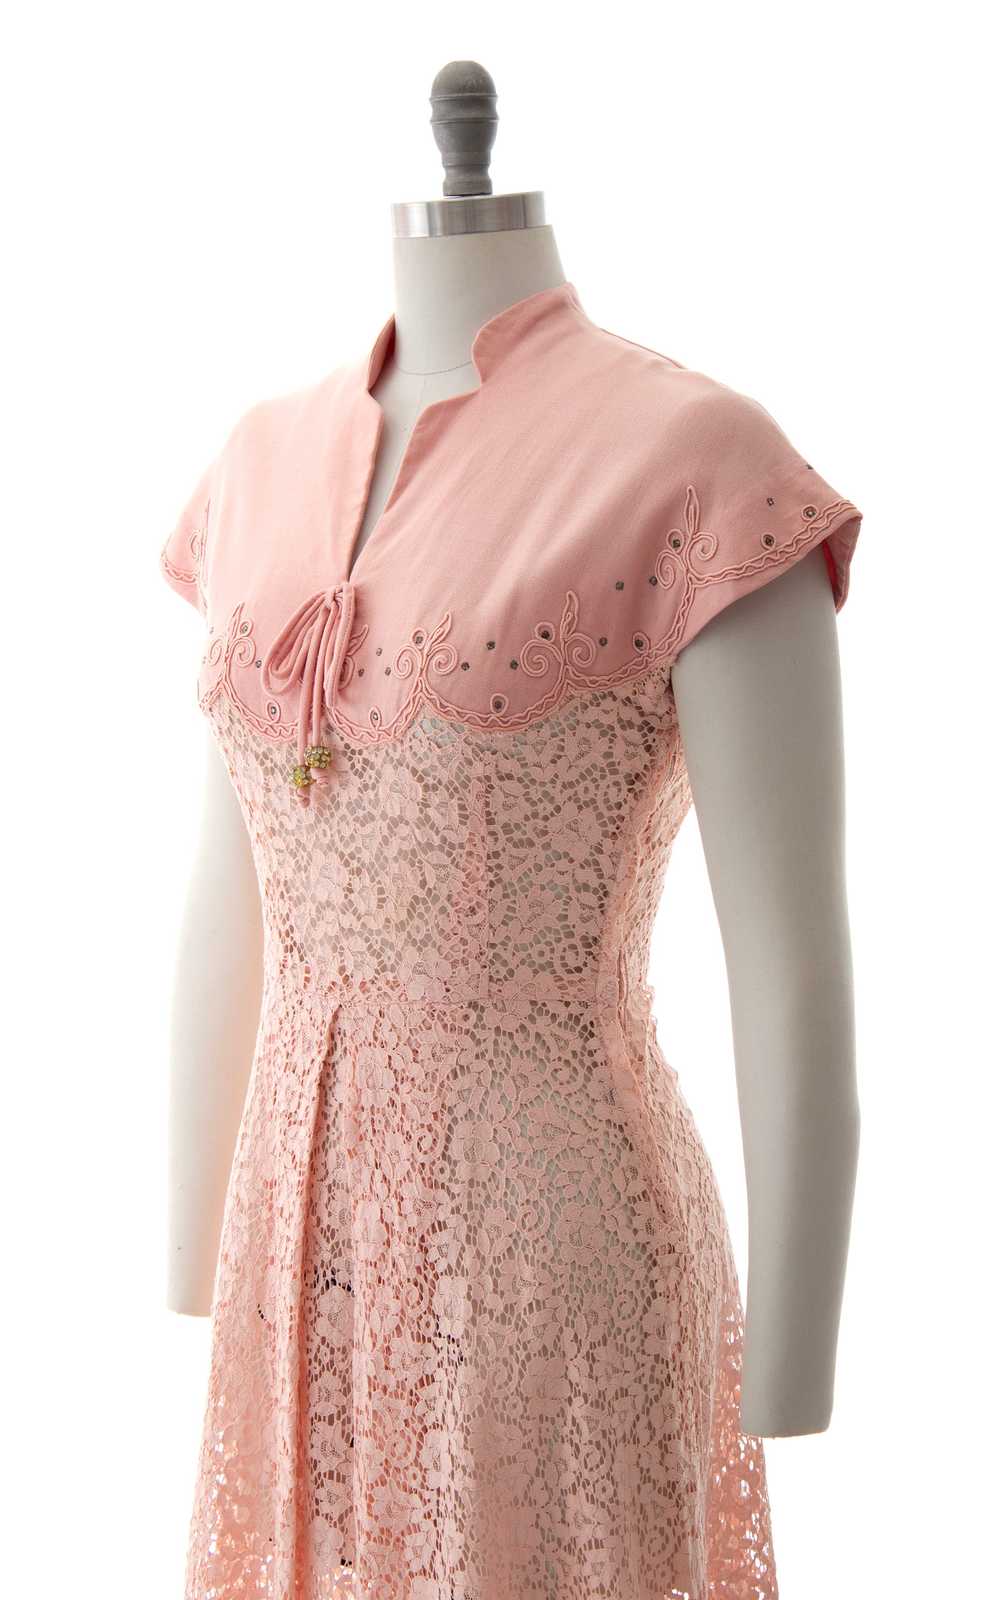 NEW ARRIVAL || 1950s Linen & Lace Dress | small - image 5